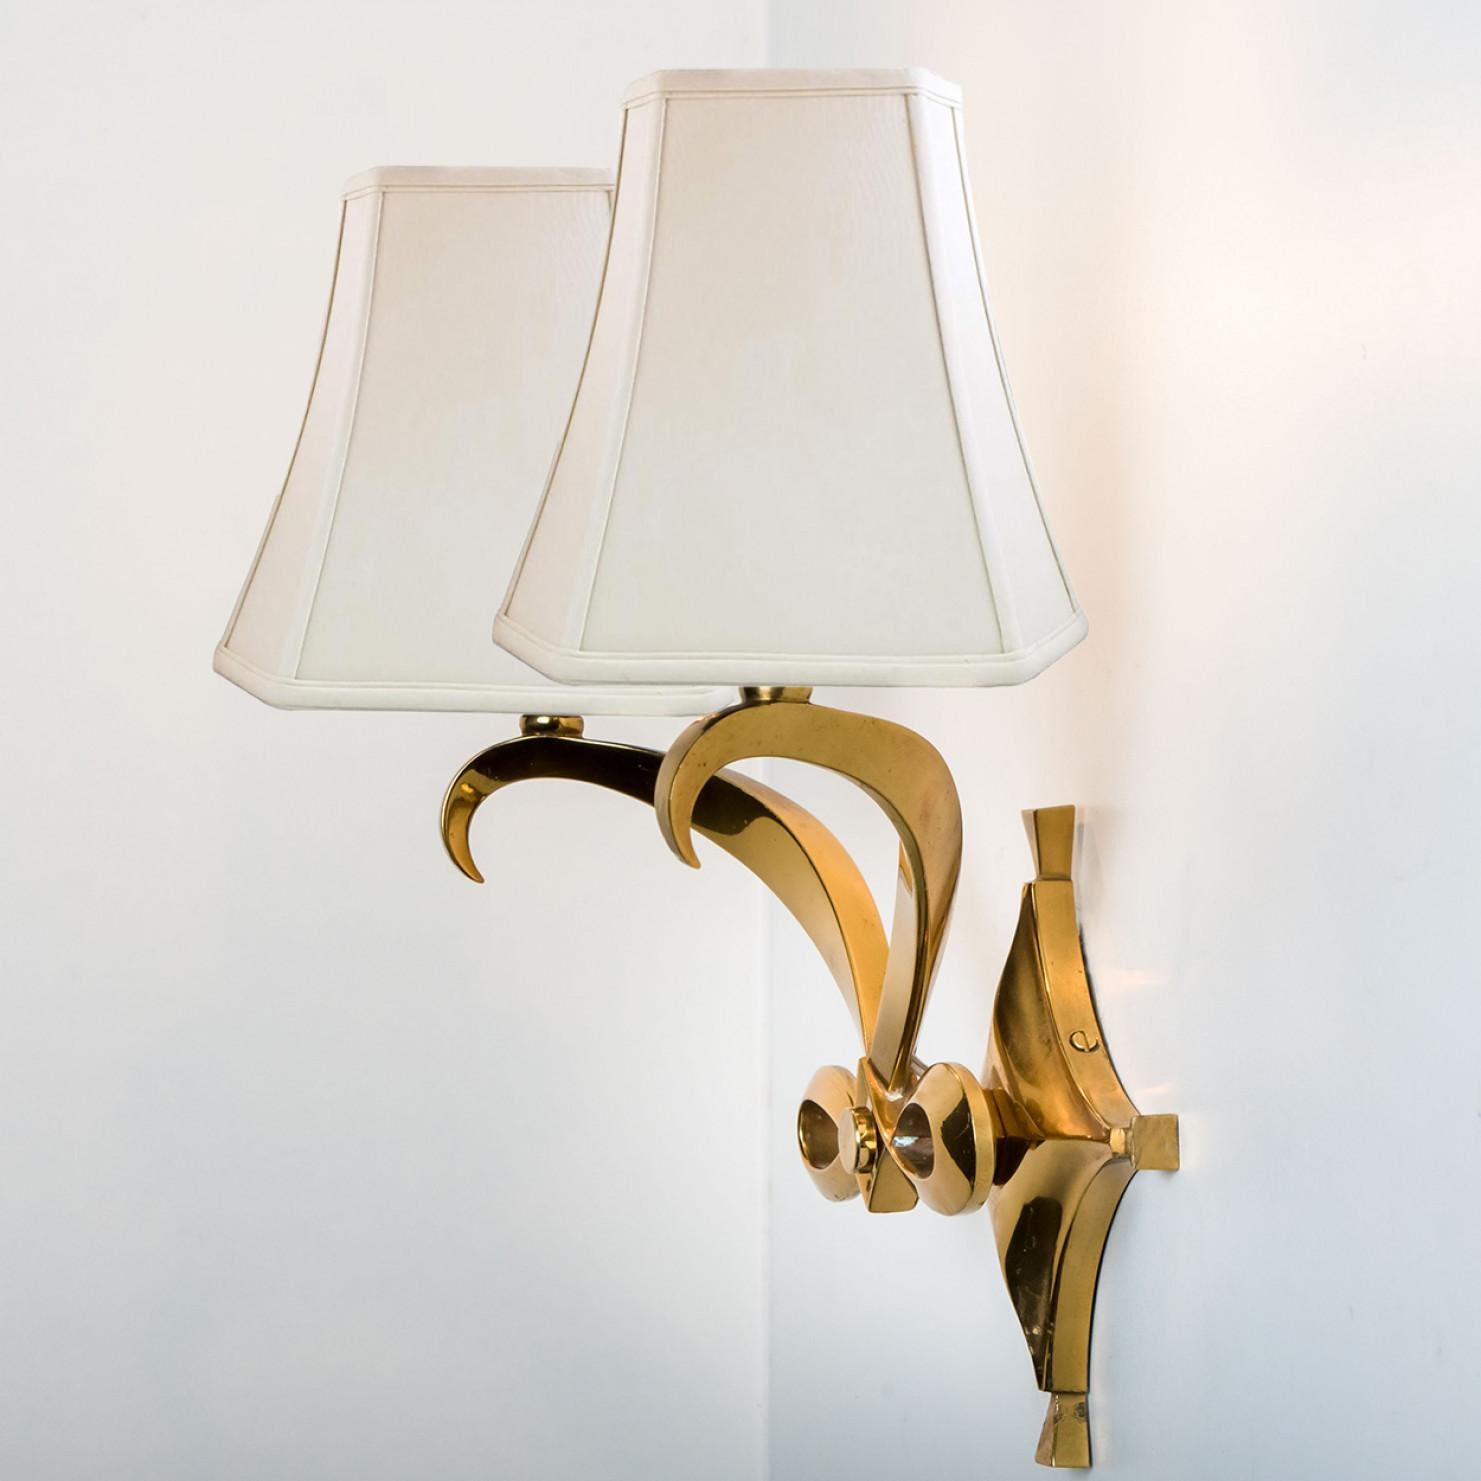 Pair of Brass Wall Sconces, Leleu, 1960 For Sale 6